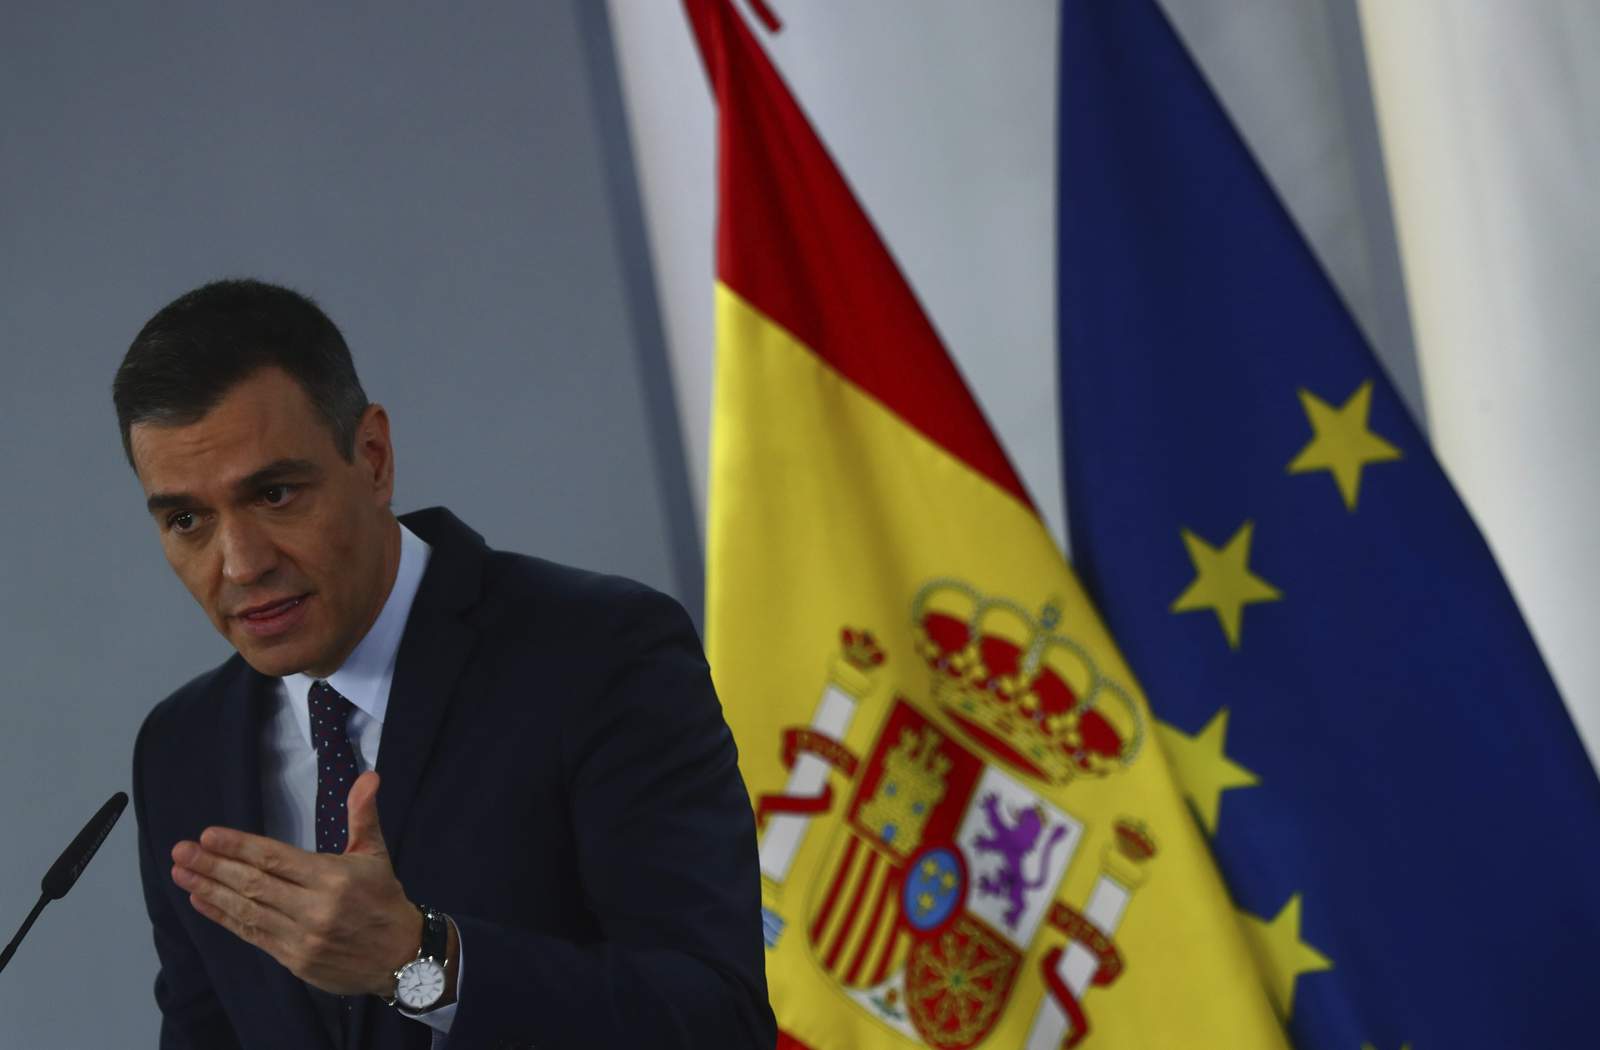 Spain's PM wants EU recovery funds to transform the nation